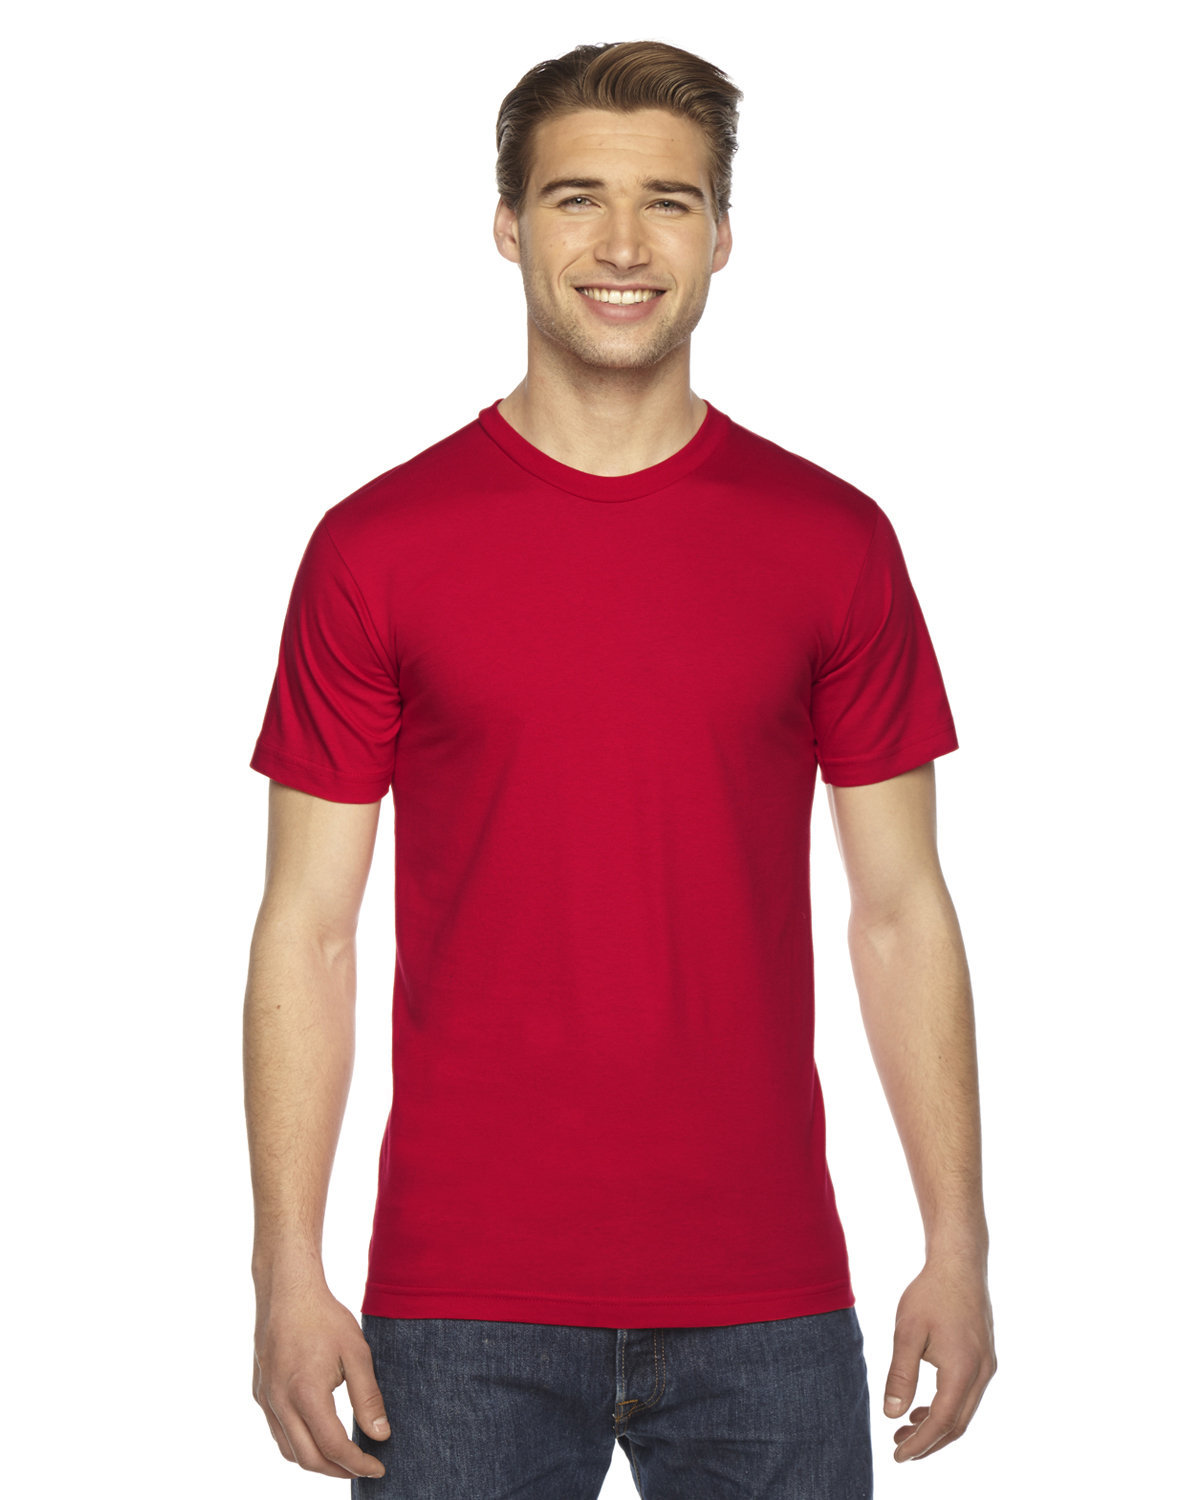 American Apparel Unisex Fine Jersey USA Made T-Shirt red 